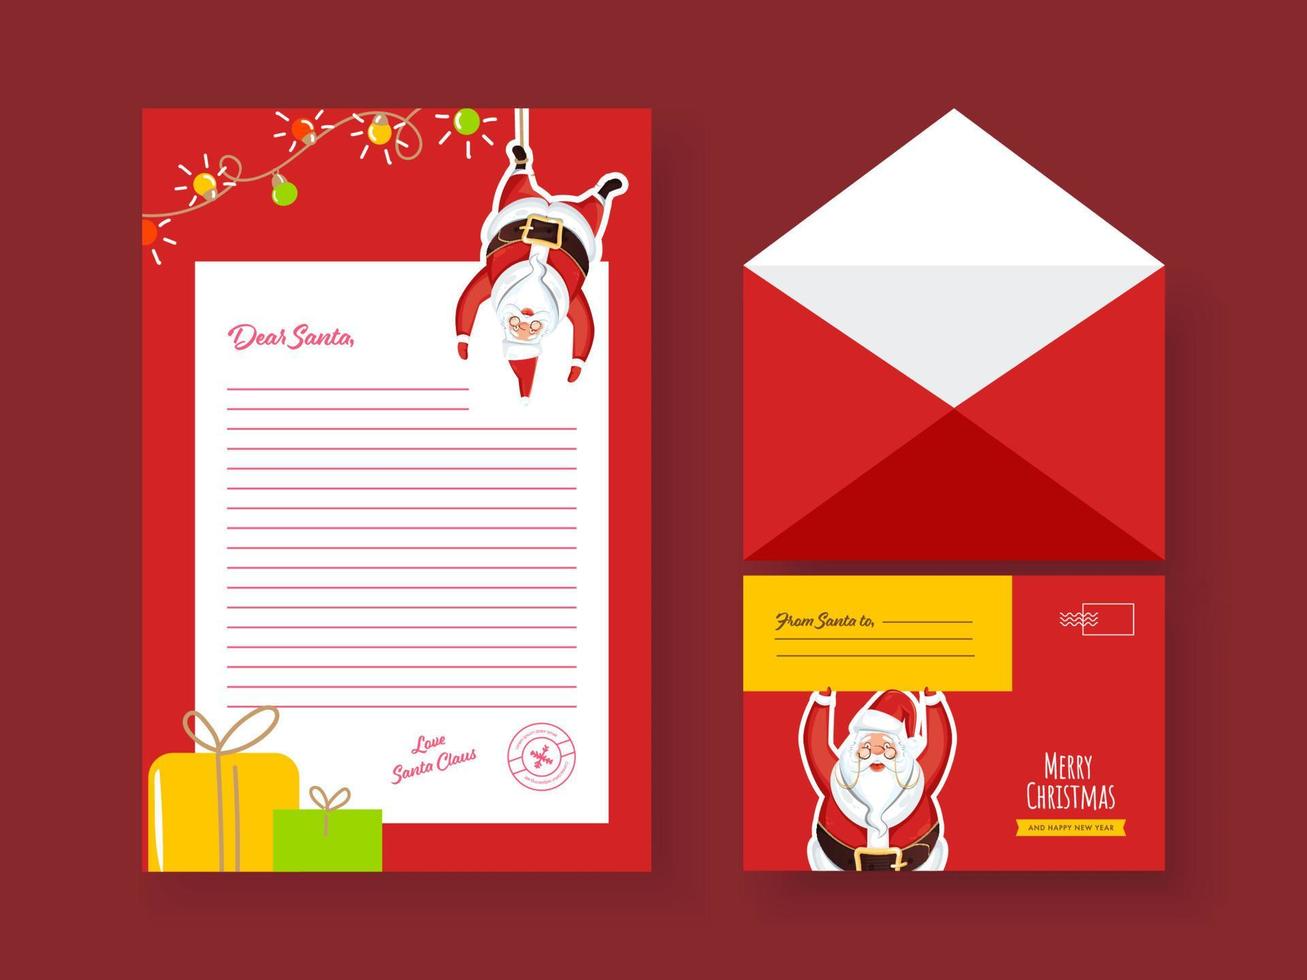 Merry Christmas Happy New Year Greeting Card Or Letter With Double-Sides Envelope In Red Color. vector